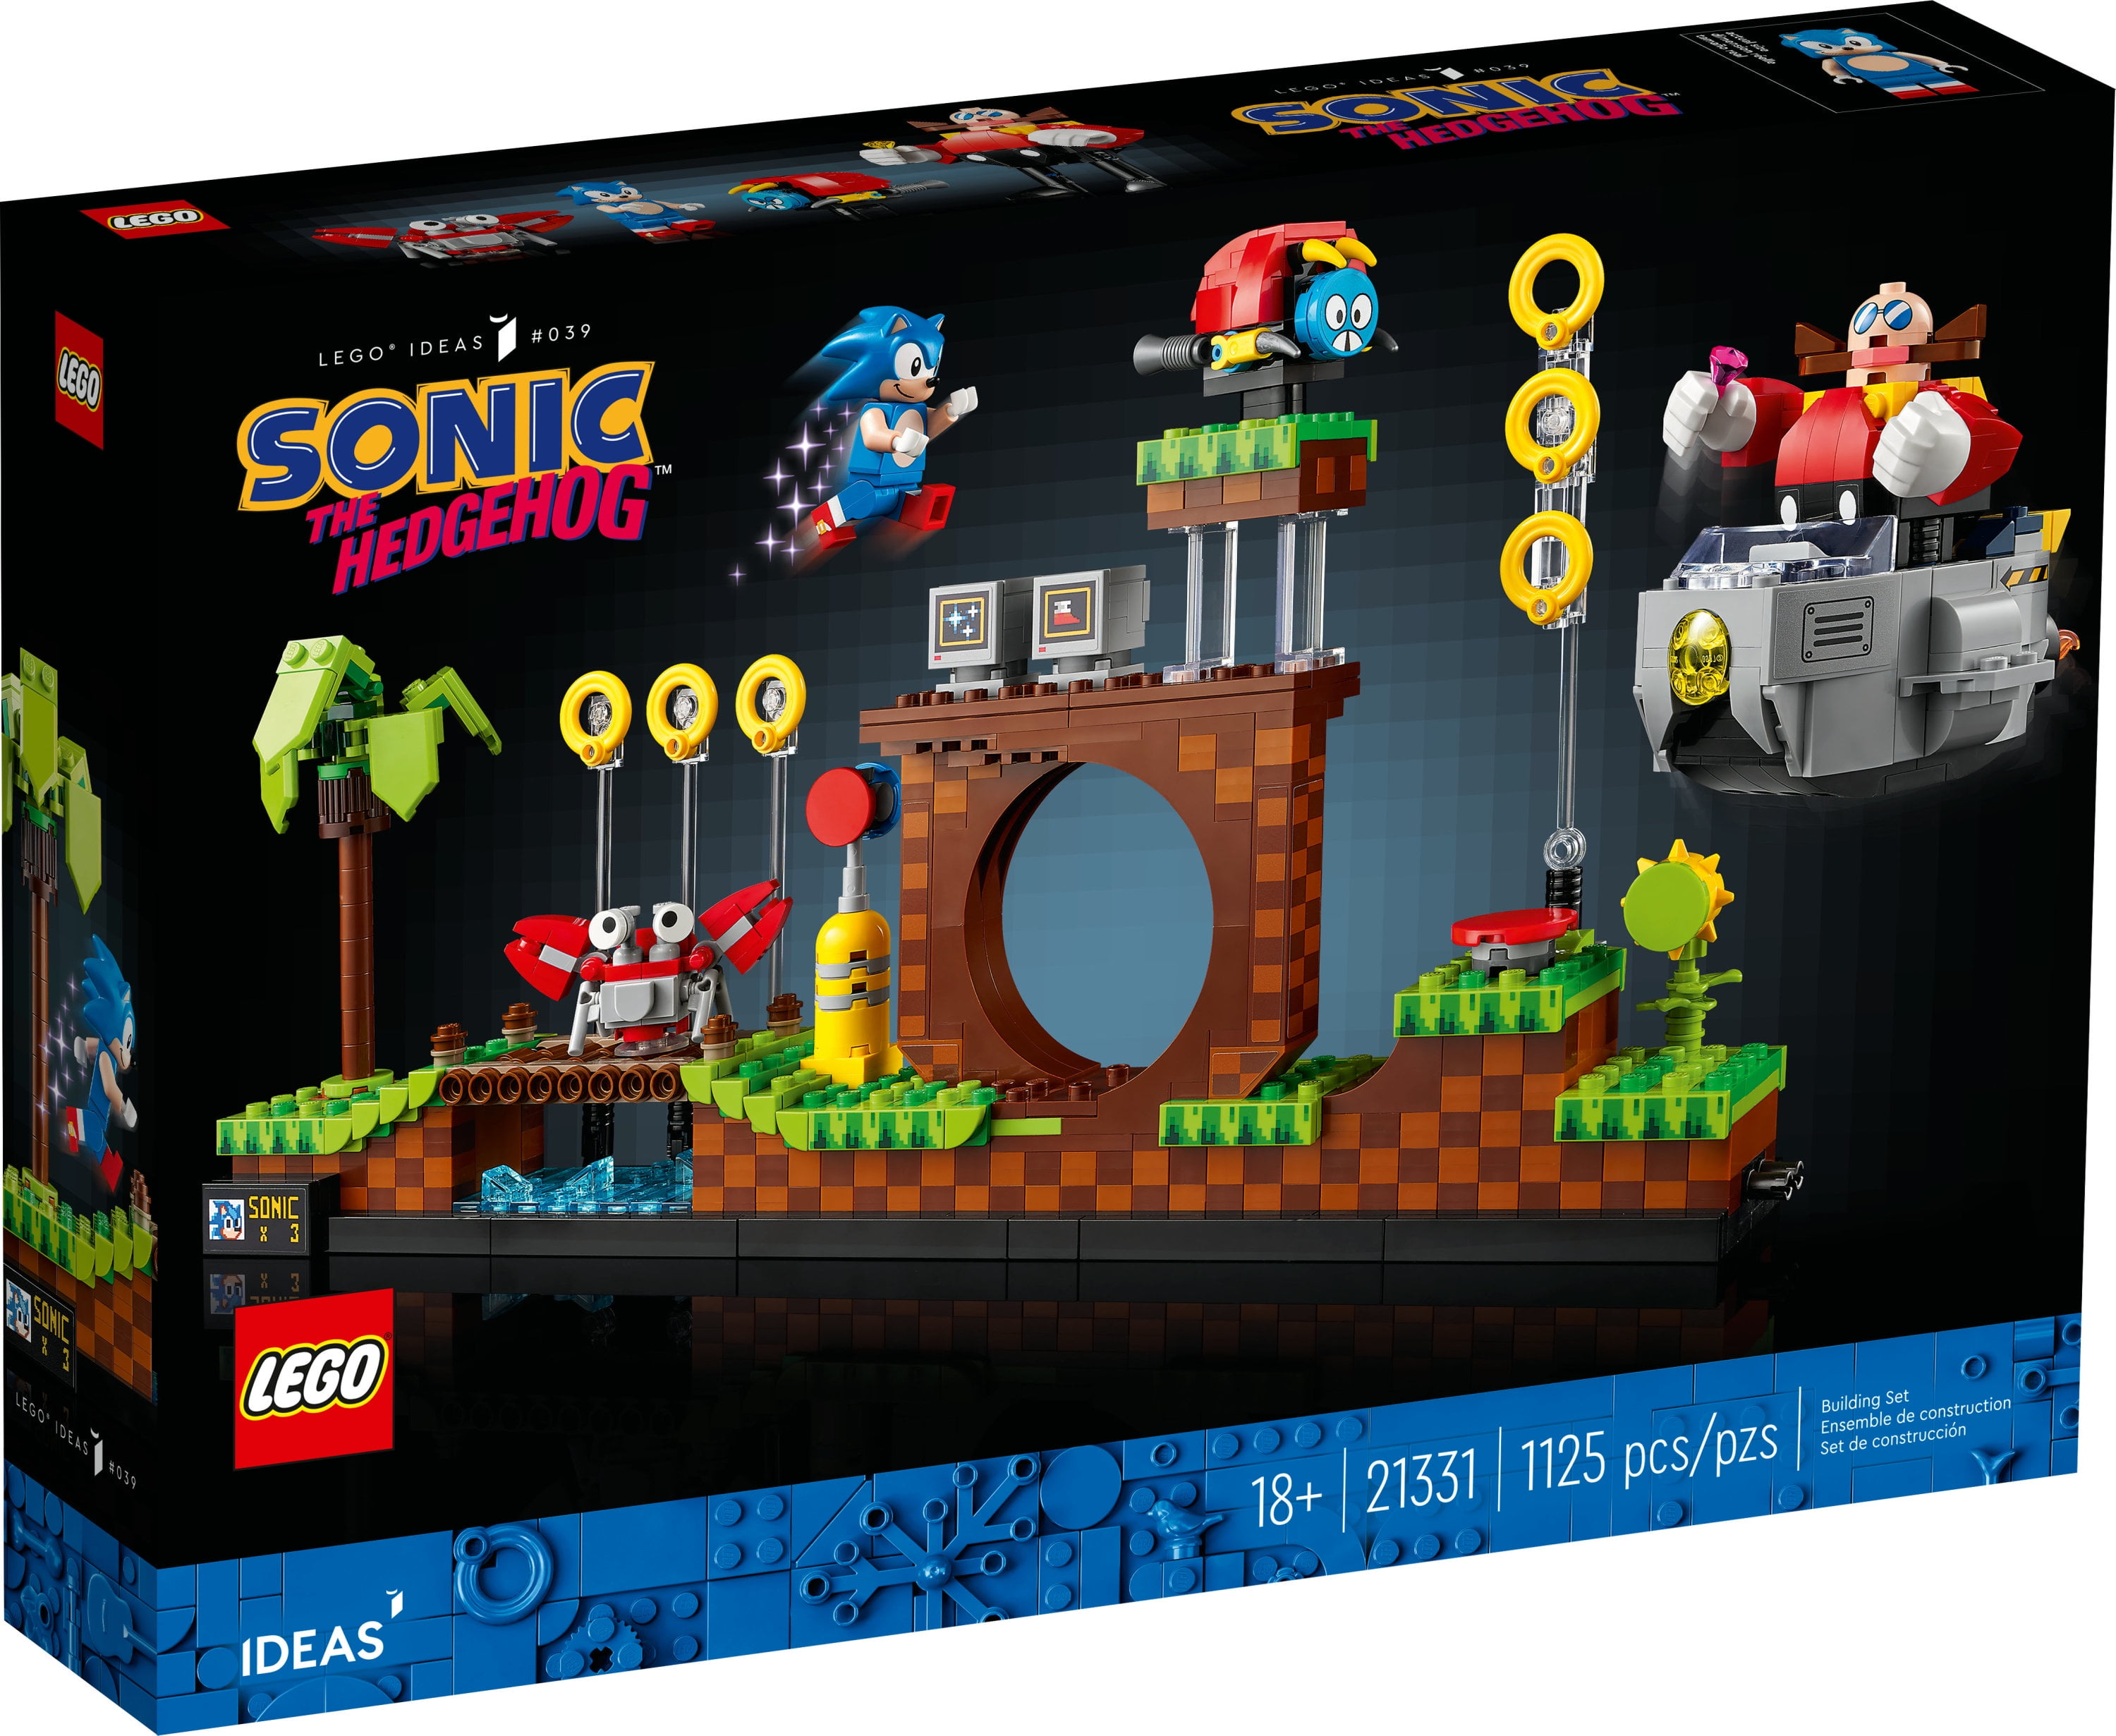 Lego Sonic the Hedgehog 21331 - toys & games - by owner - sale - craigslist